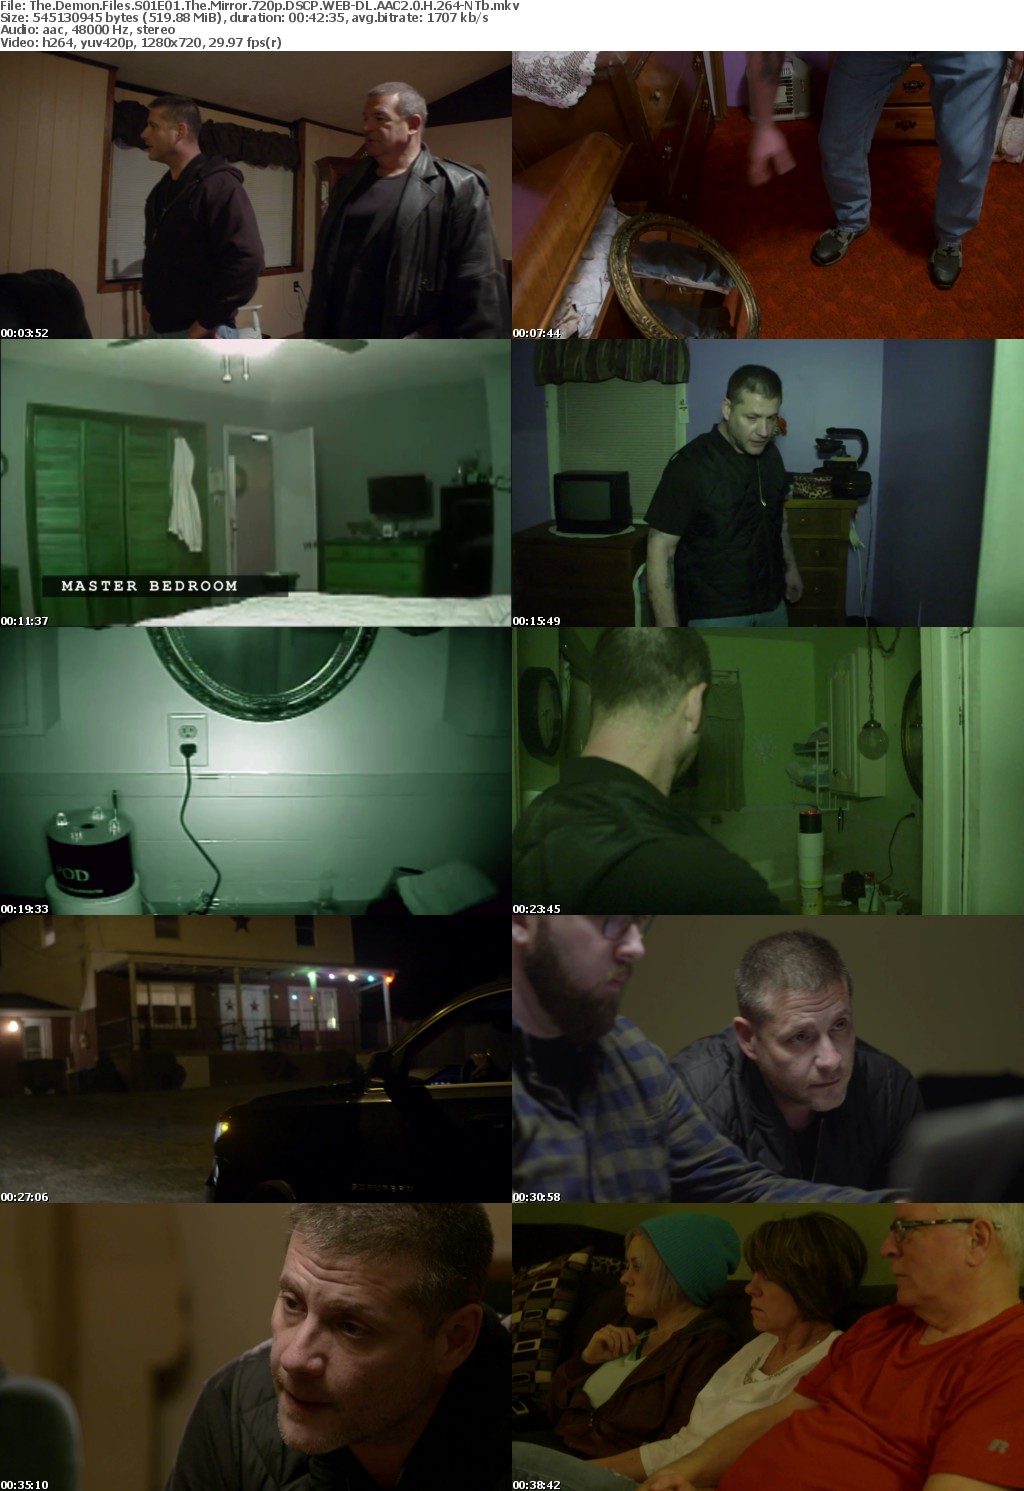 The Demon Files S01E01 The Mirror 720p DSCP WEB-DL AAC2 0 H 264-NTb